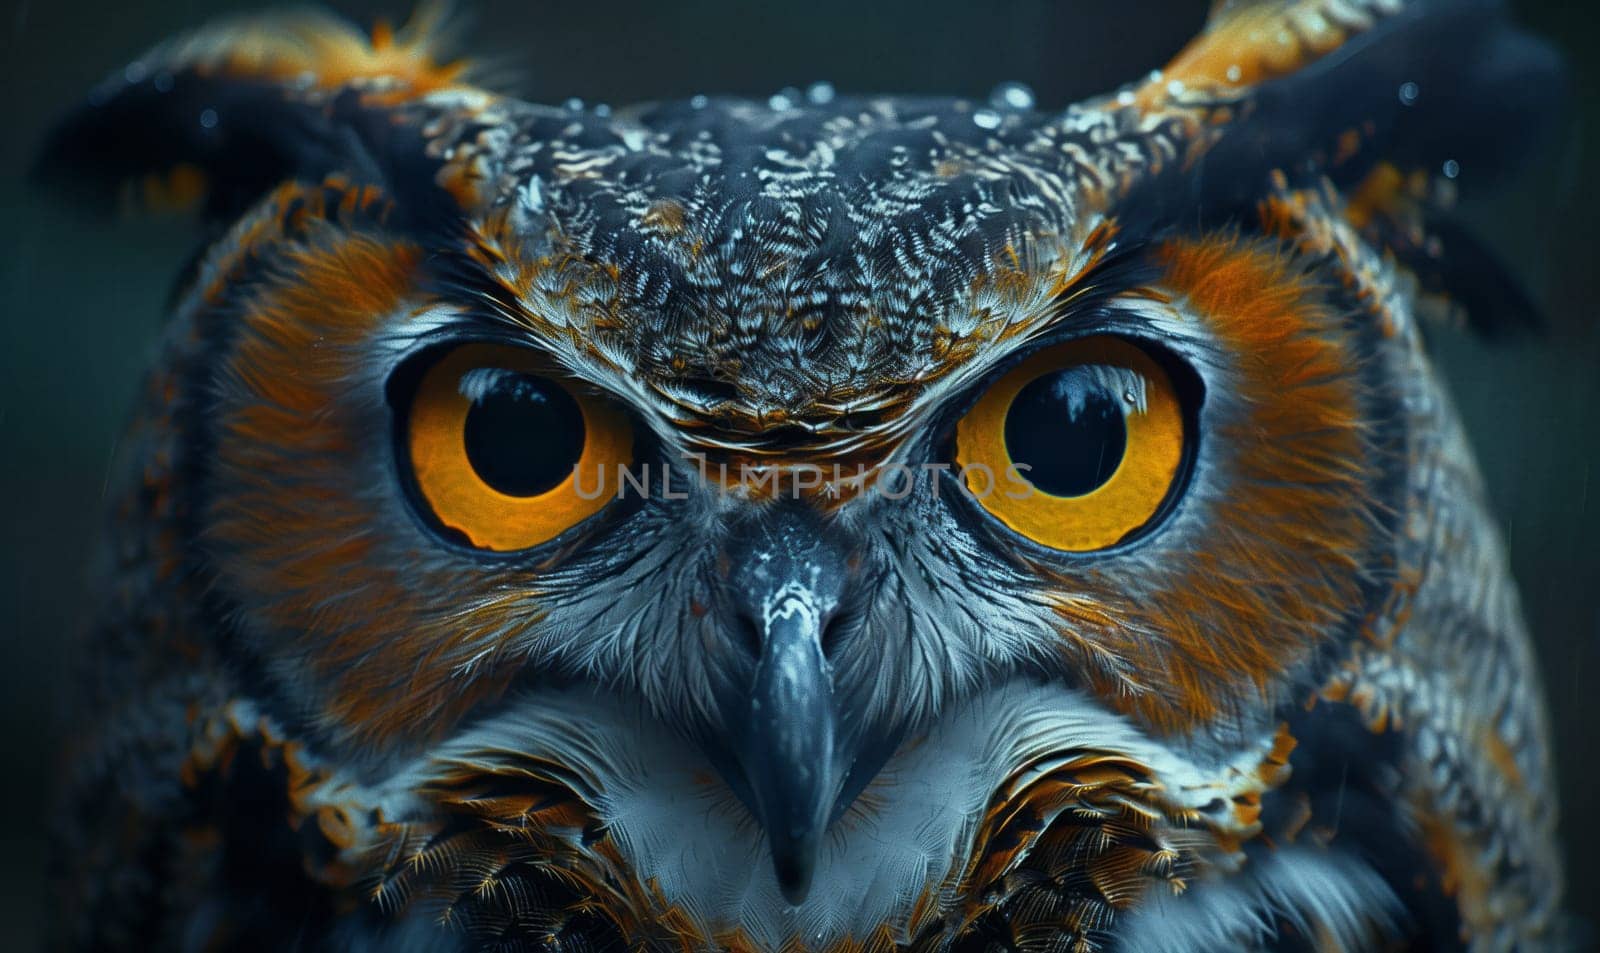 A closeup of an Eastern Screech Owls head, showcasing its bright yellow eyes with intense gaze. The owls distinctive iris, beak, and feather details are visible in this terrestrial animal